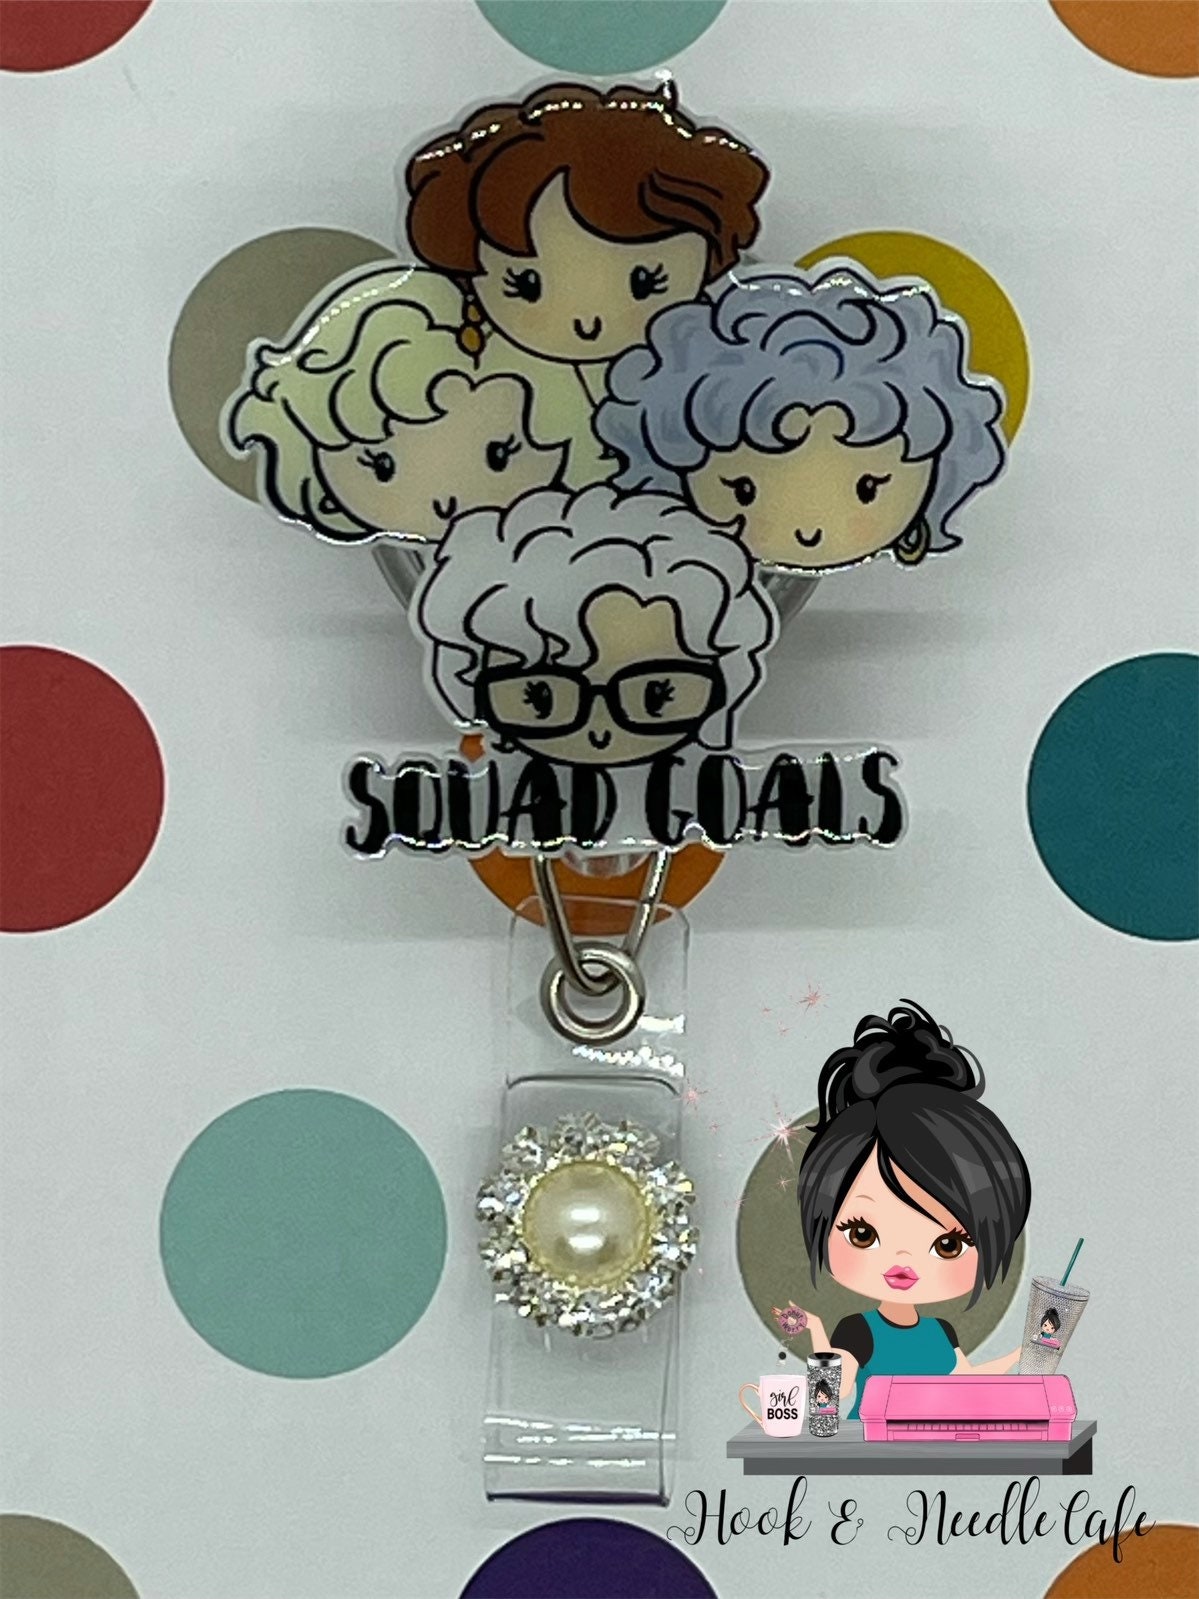 Golden Girls - Squad Goals - Thank You For Being A Friend - Badge Holder -  Nurse Gift - Retractable Badge Holder - Cute Gift - Stay Golden